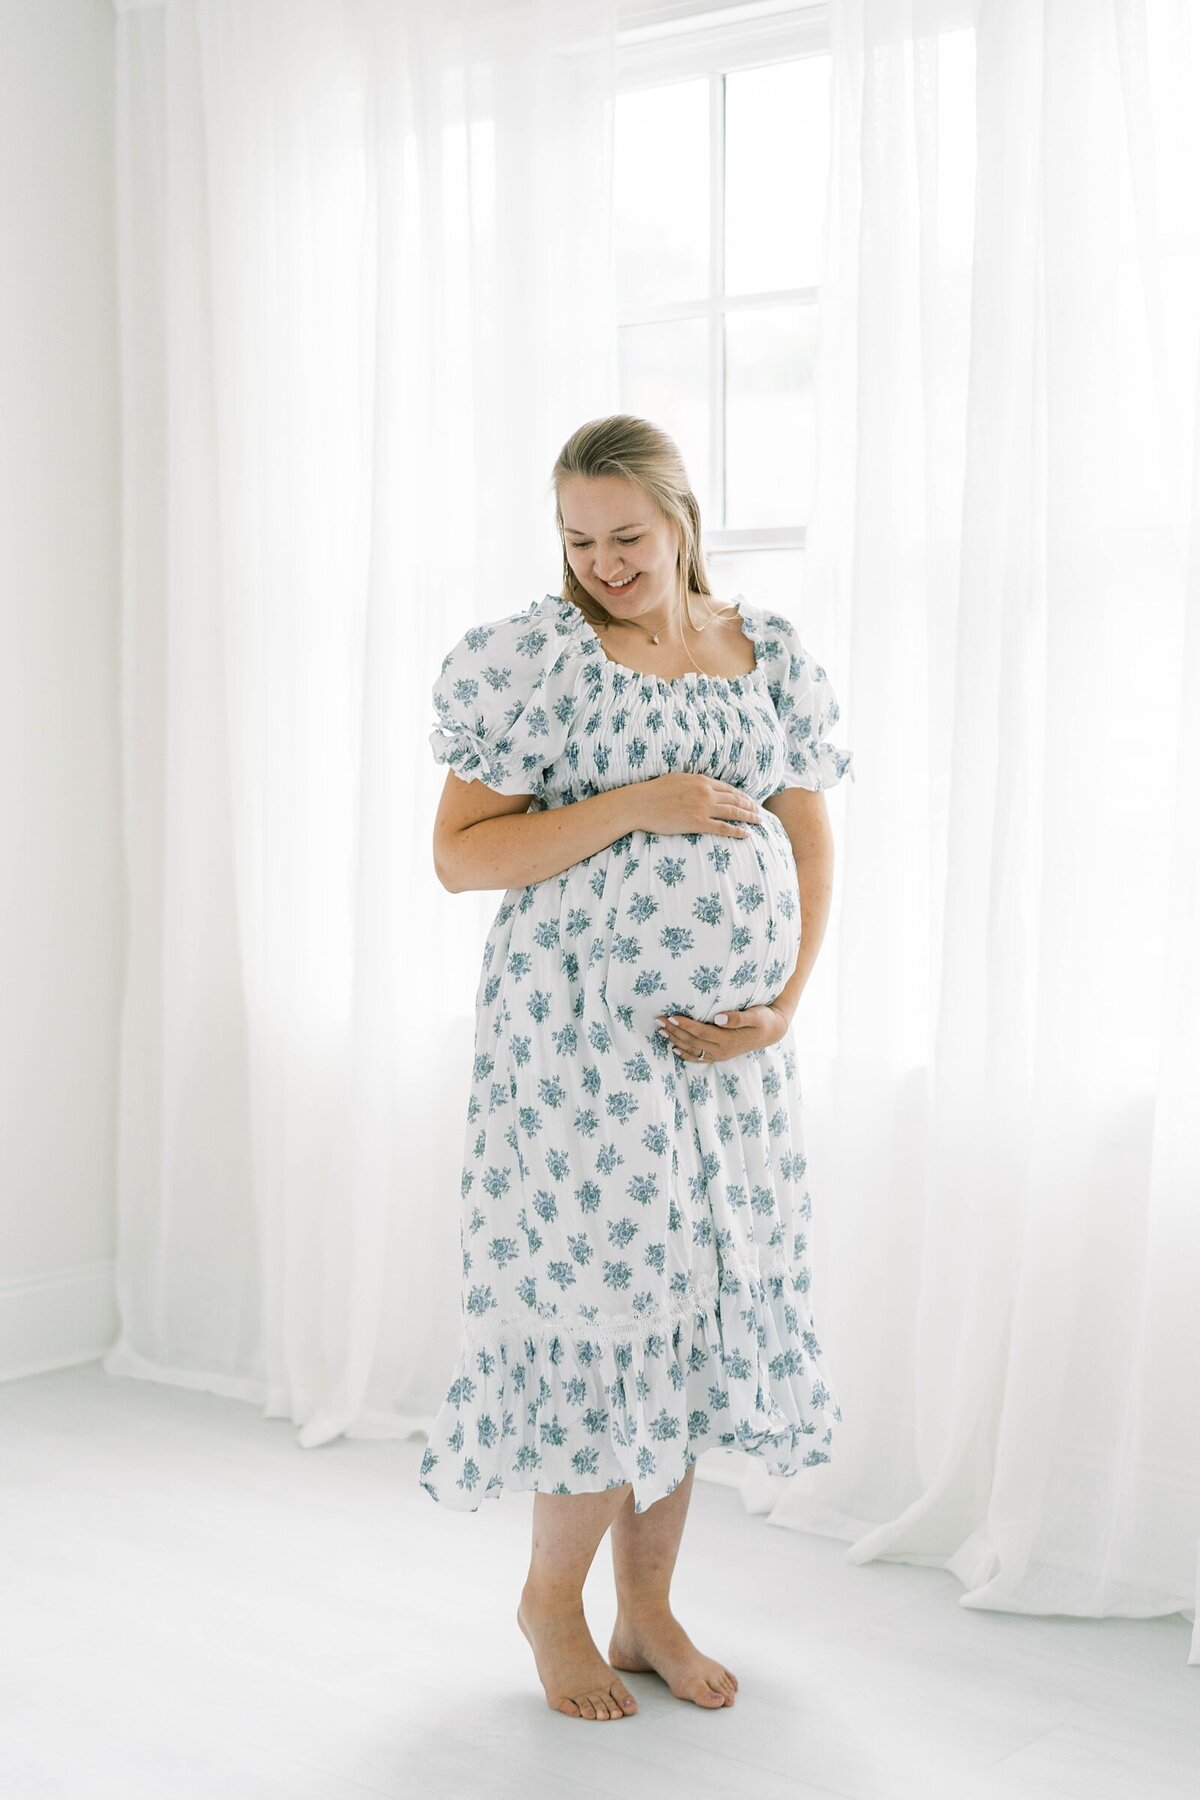 Roswell Maternity Photographer_0084